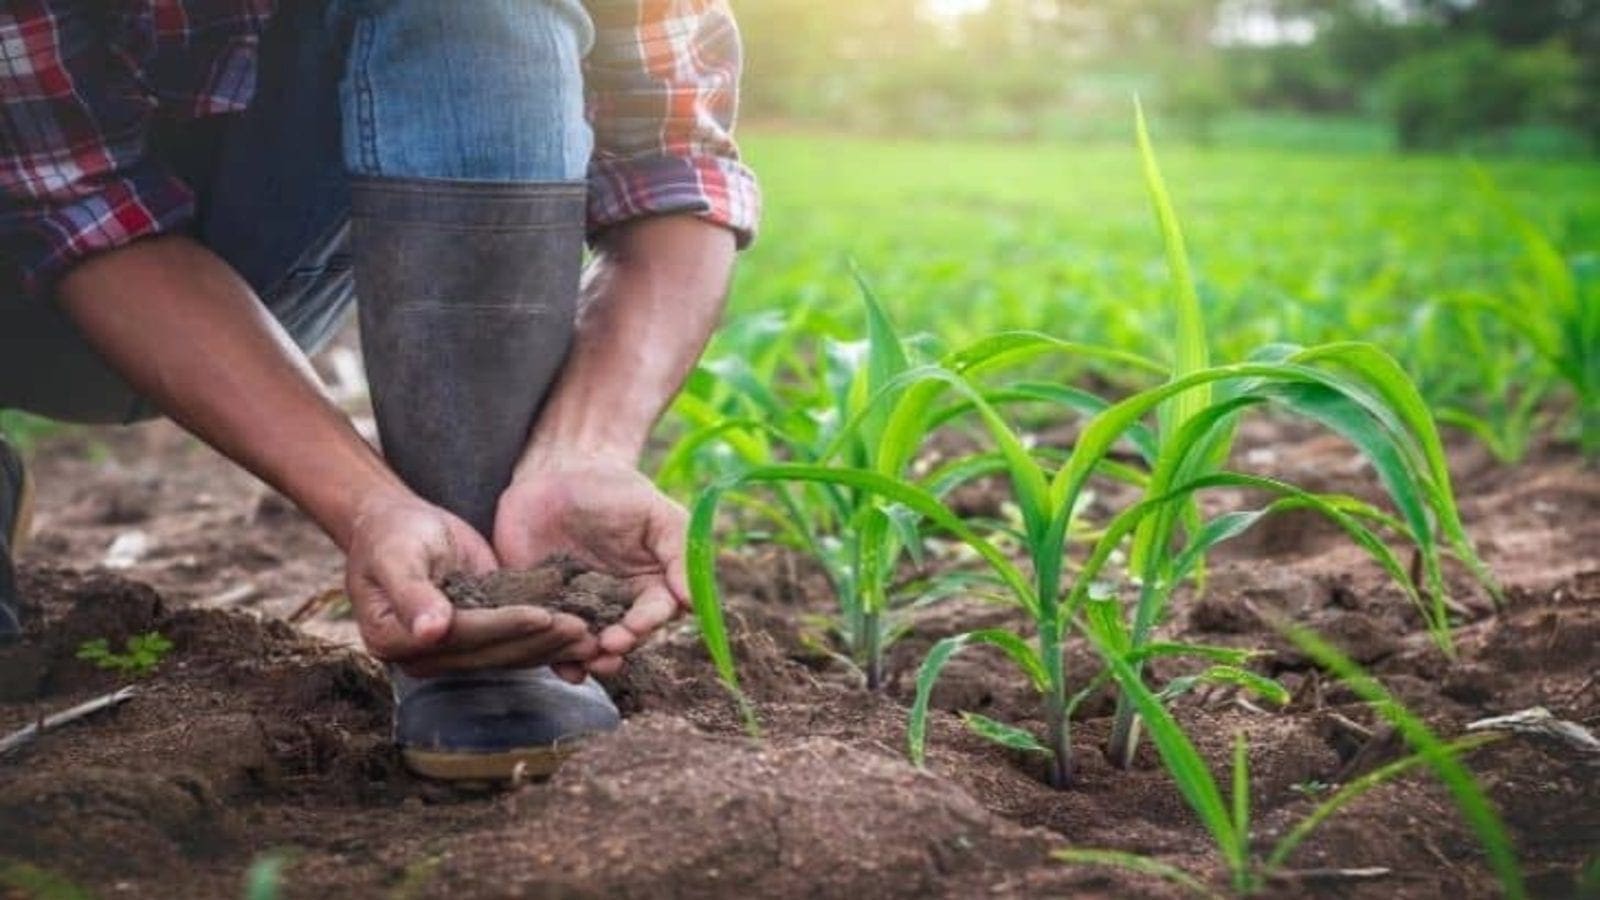 Kellogg’s helps more than 440,000 farmers adopt sustainable farming practices